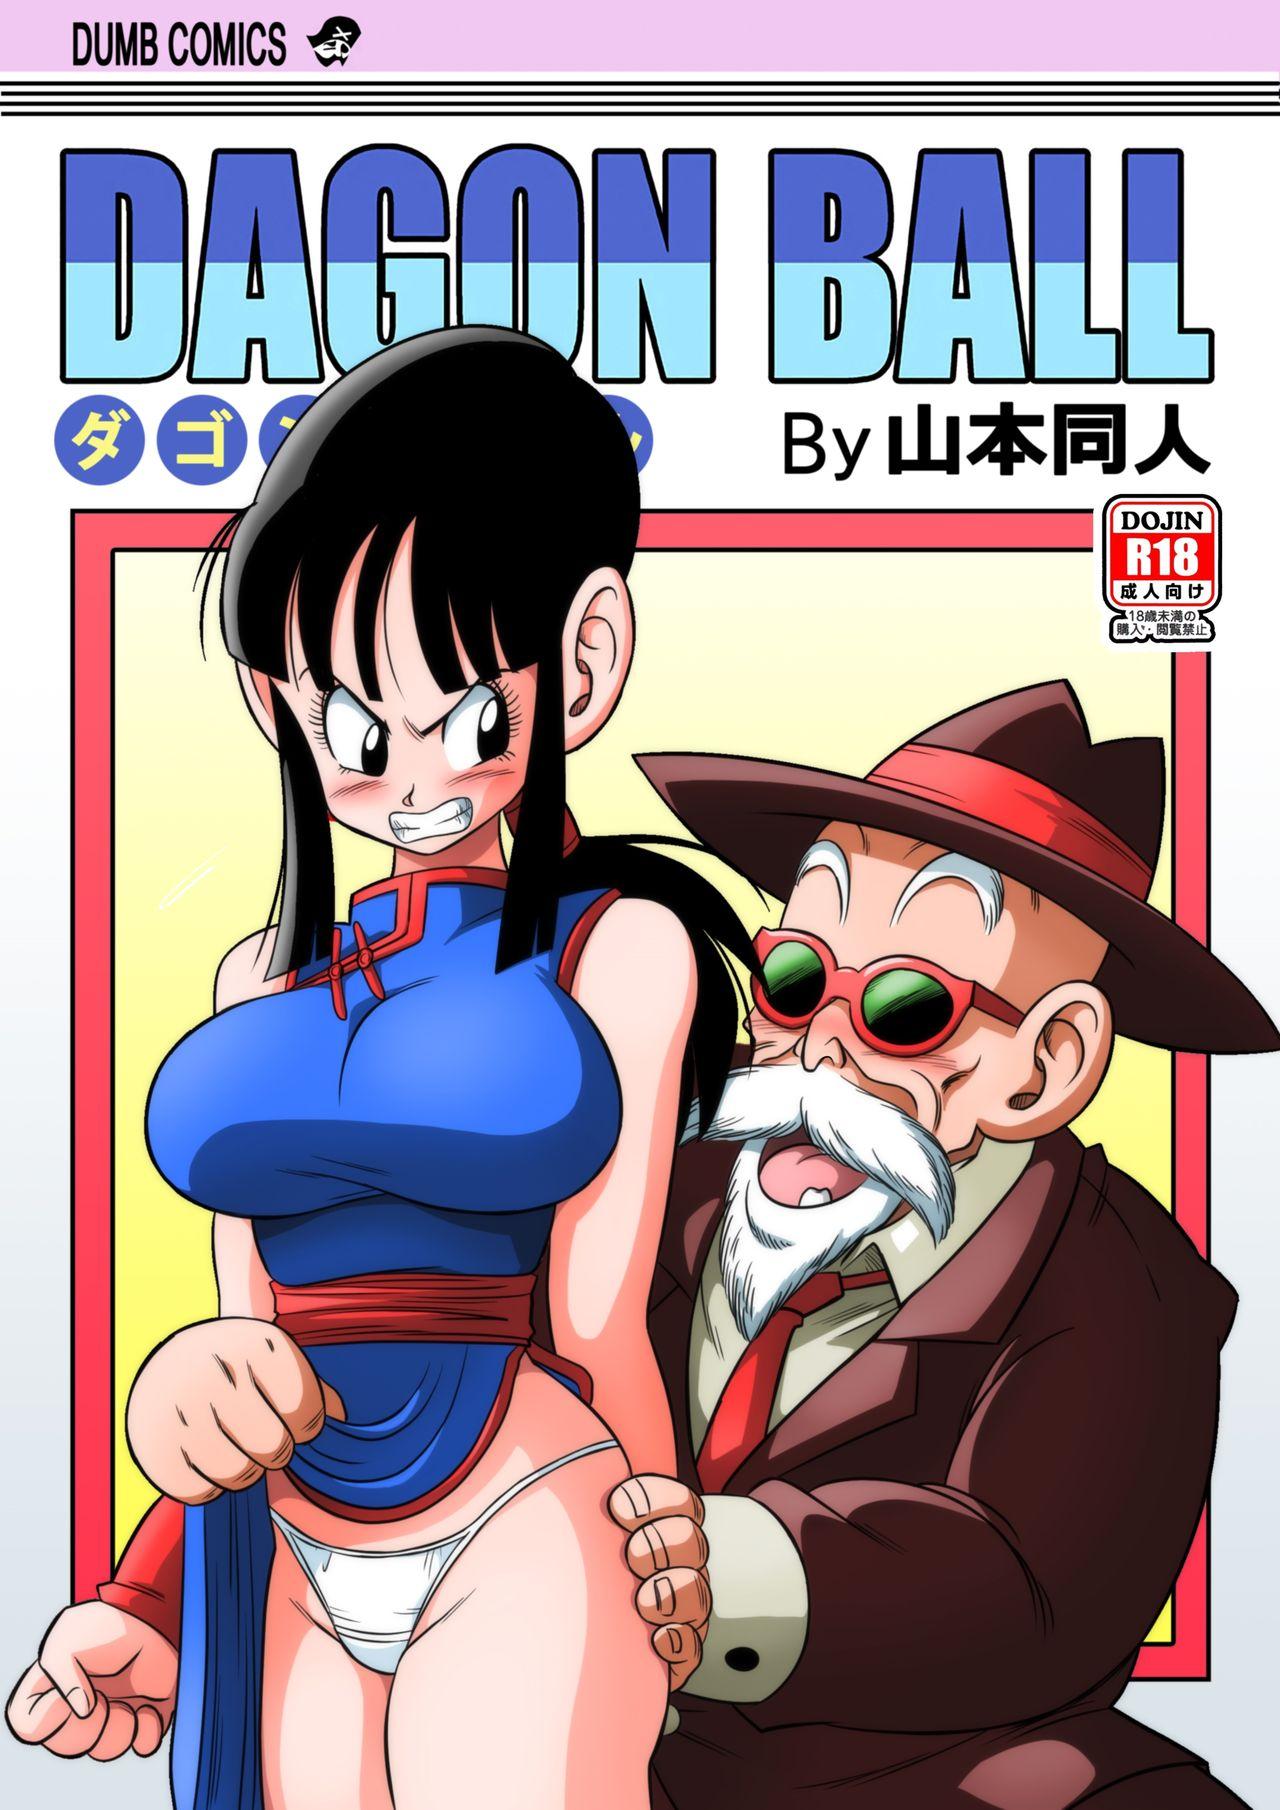 Cock Suck "An Ancient Tradition" - Young Wife is Harassed! - Dragon ball z Leche - Page 1